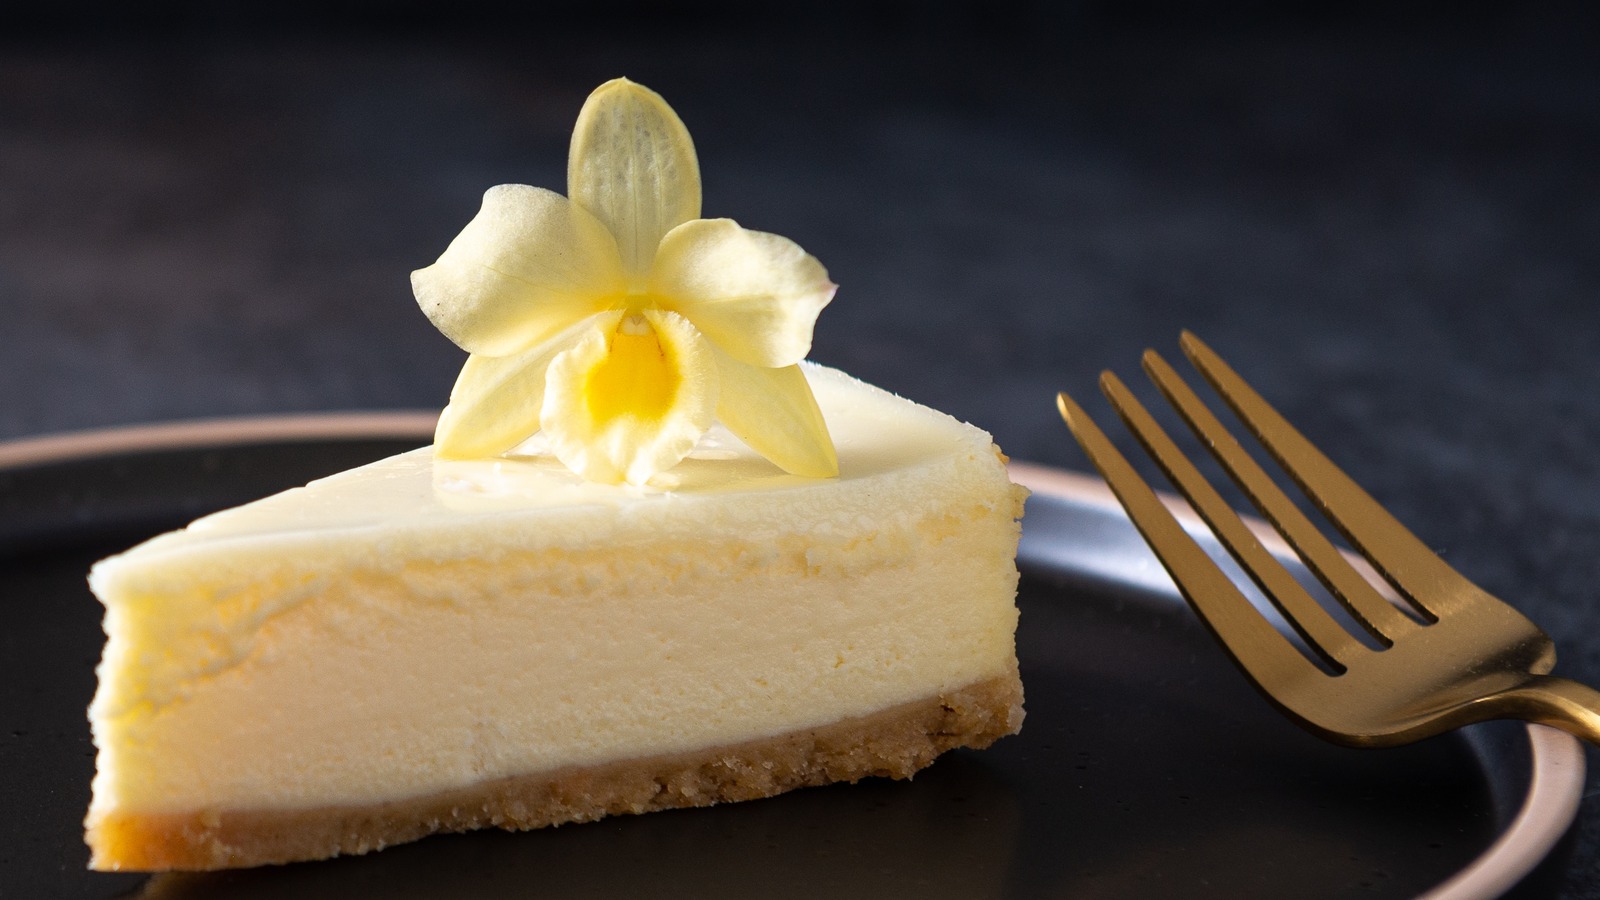 https://www.thedailymeal.com/img/gallery/why-you-should-always-cook-your-cheesecake-in-a-water-bath/l-intro-1668799796.jpg